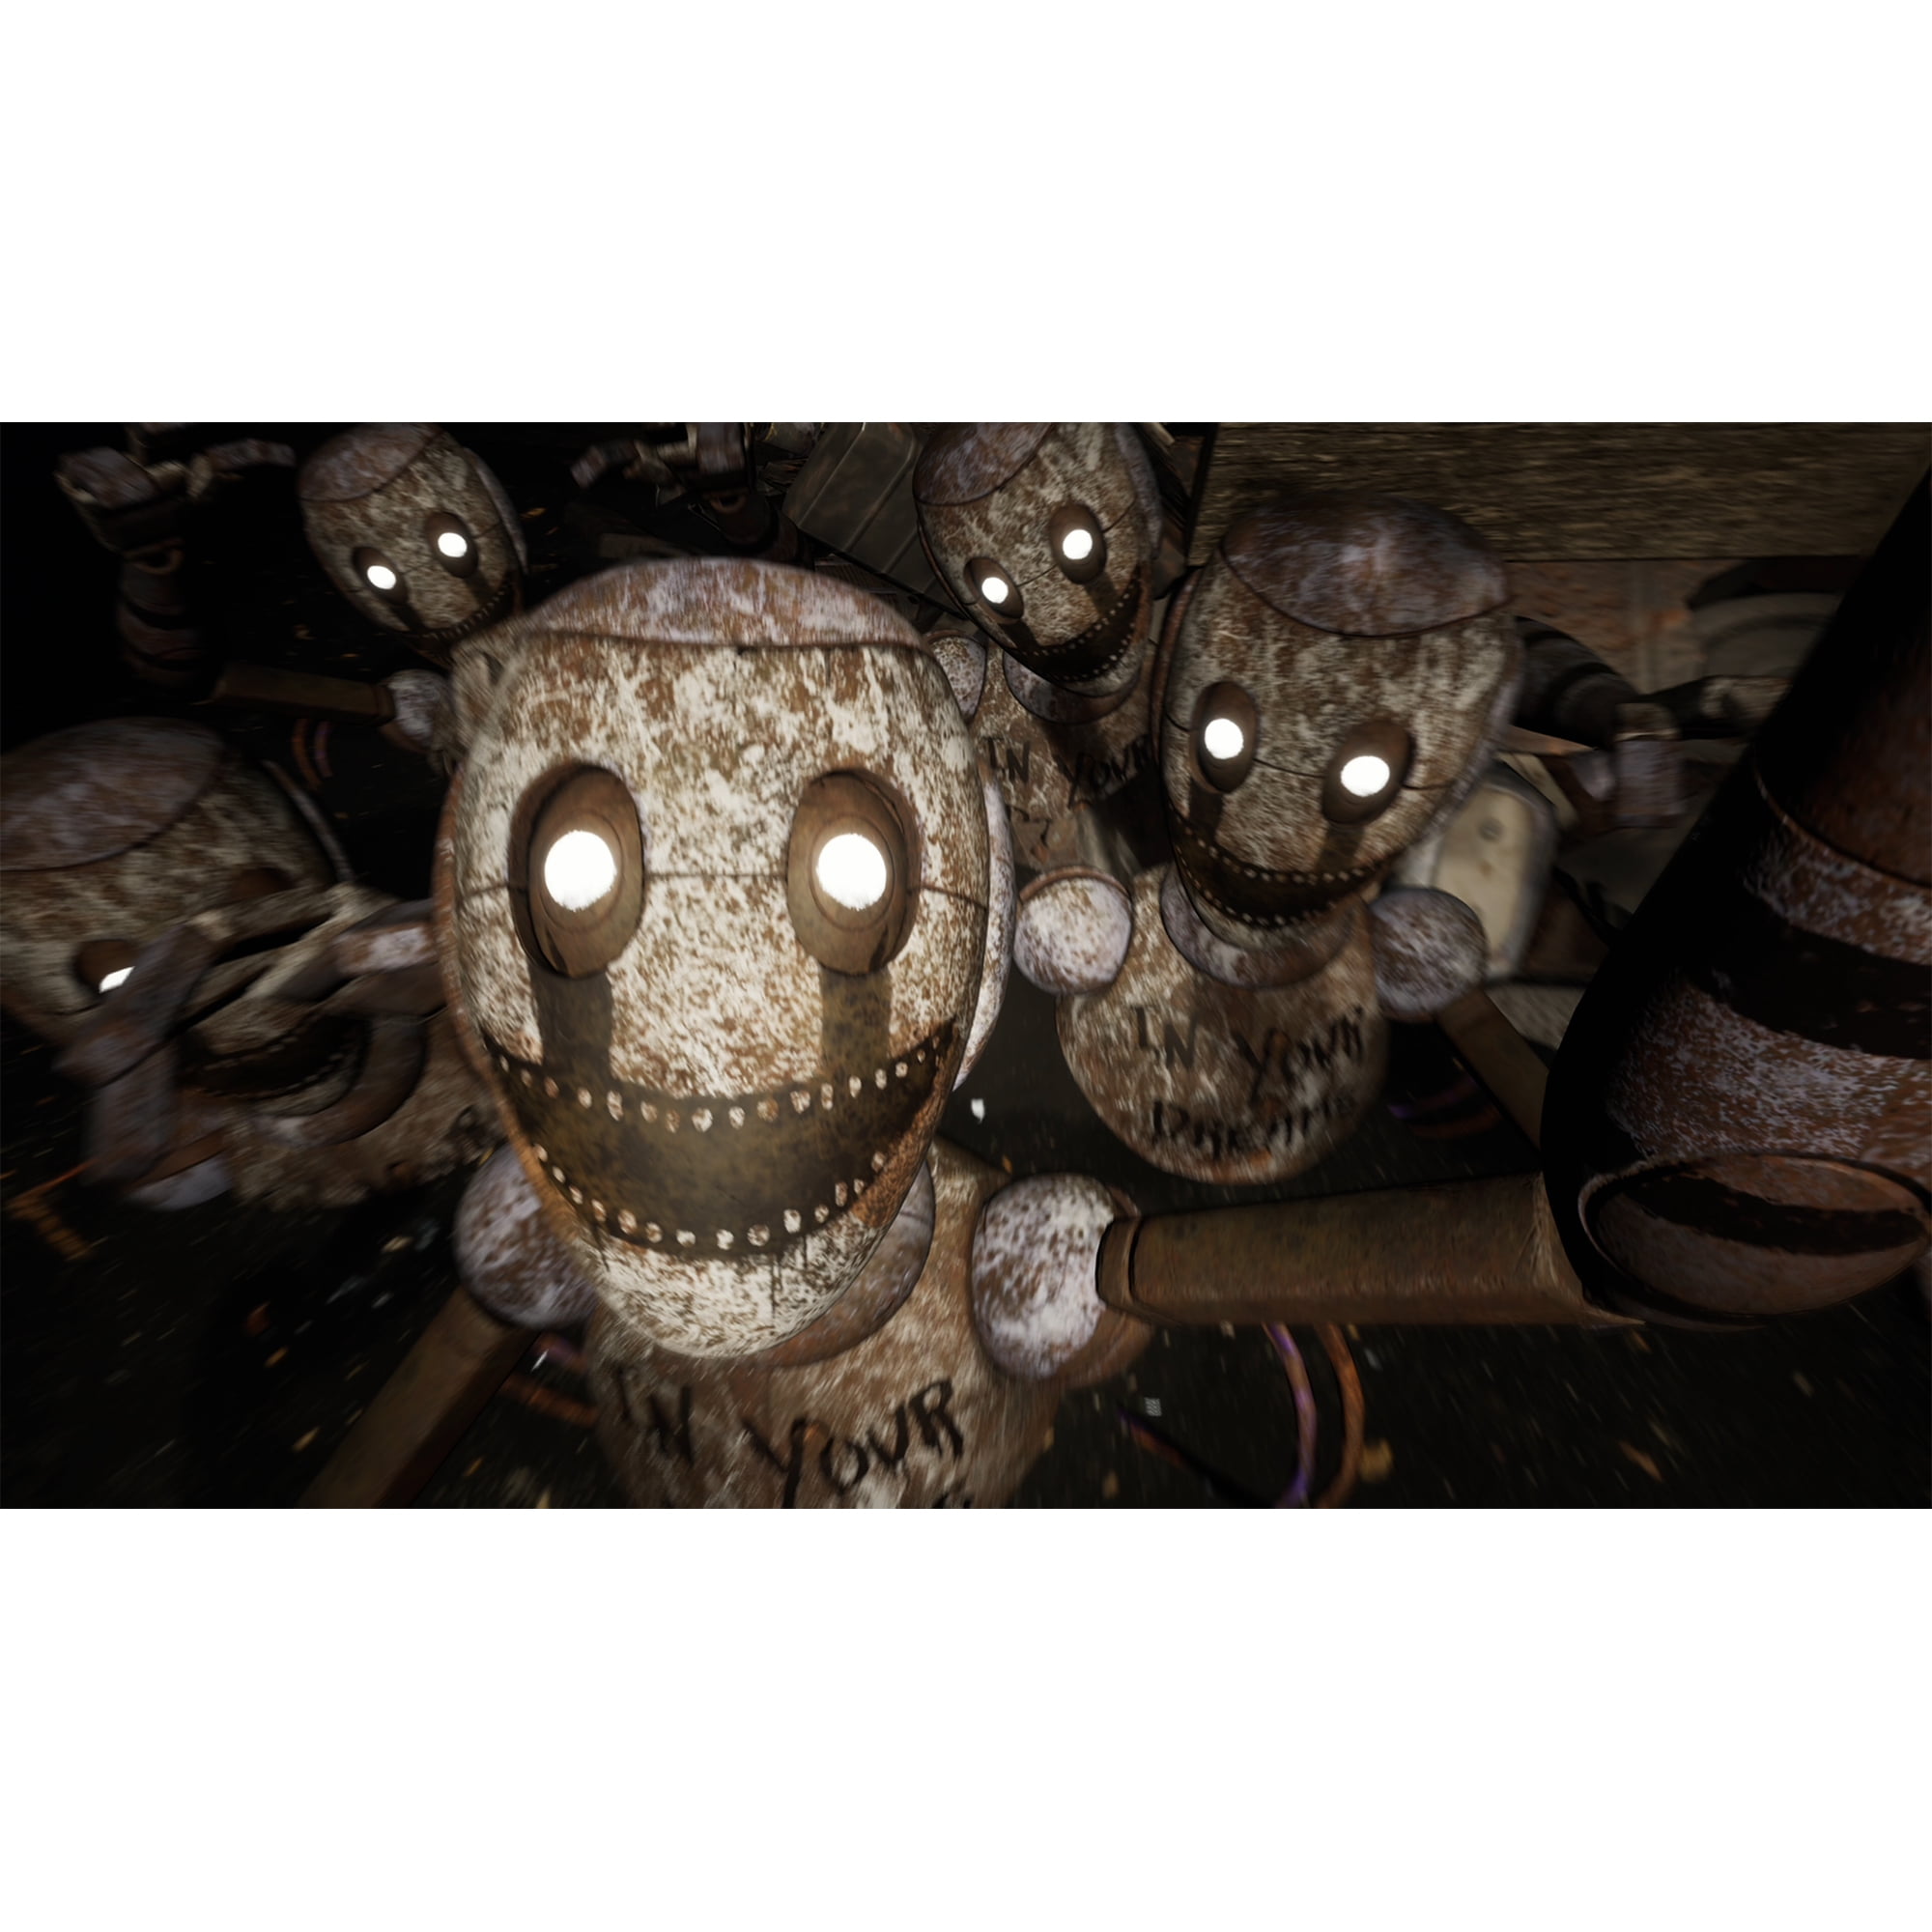 Check out these terrifying new Five Nights at Freddy's 4 images